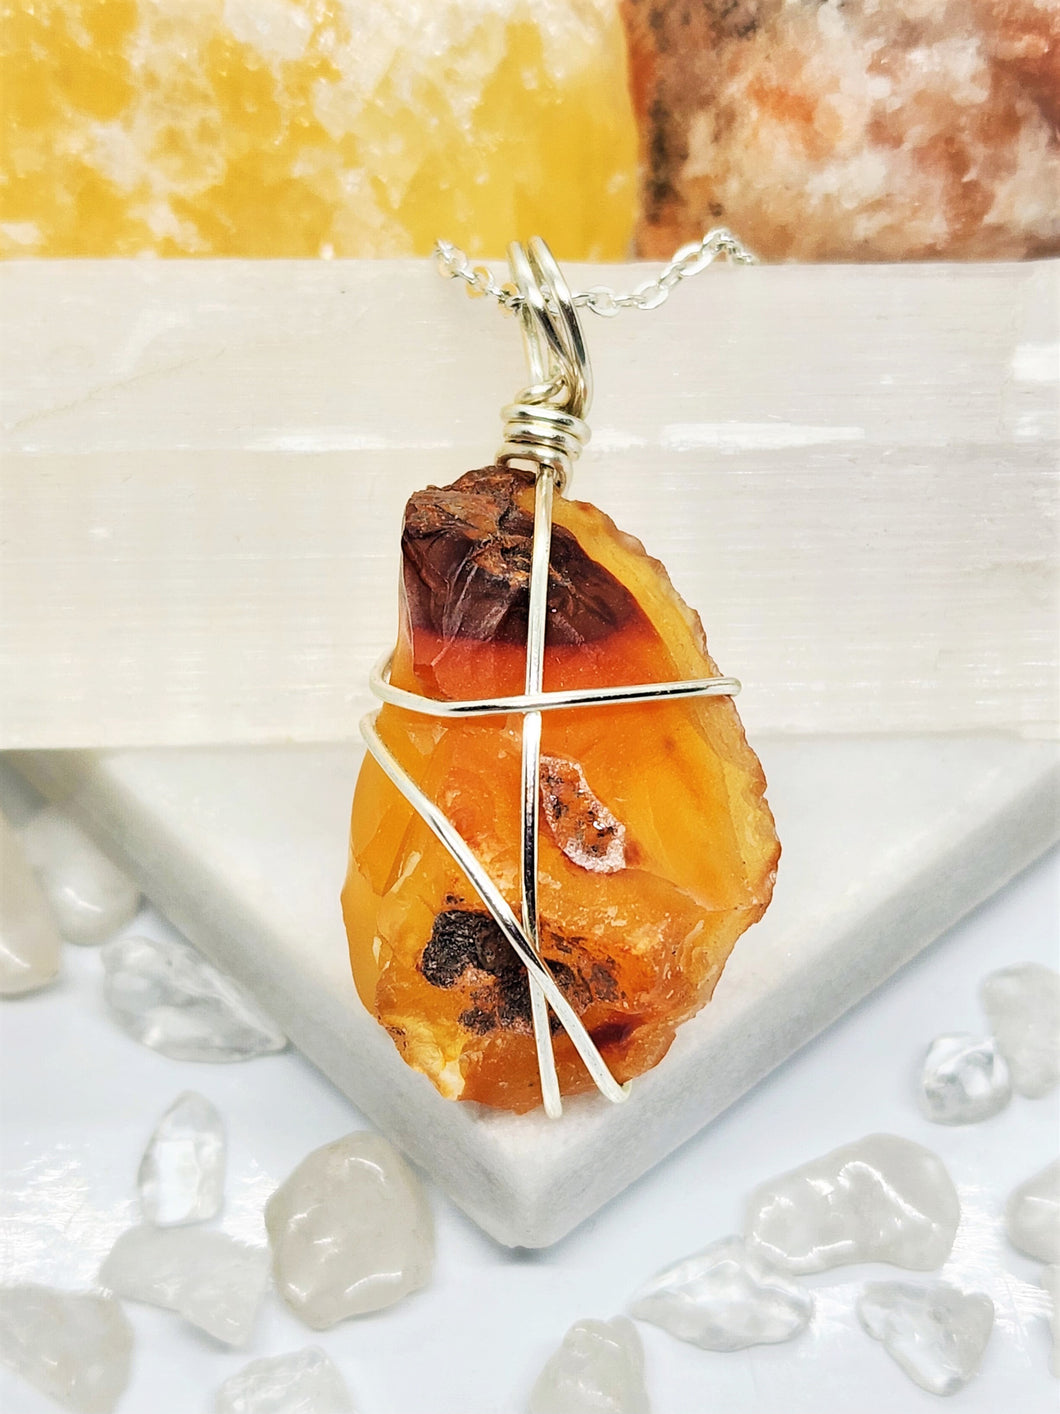 Carnelian is believed to enhance creativity, courage, and passion while also promoting a strong connection to one's inner self and spiritual growth